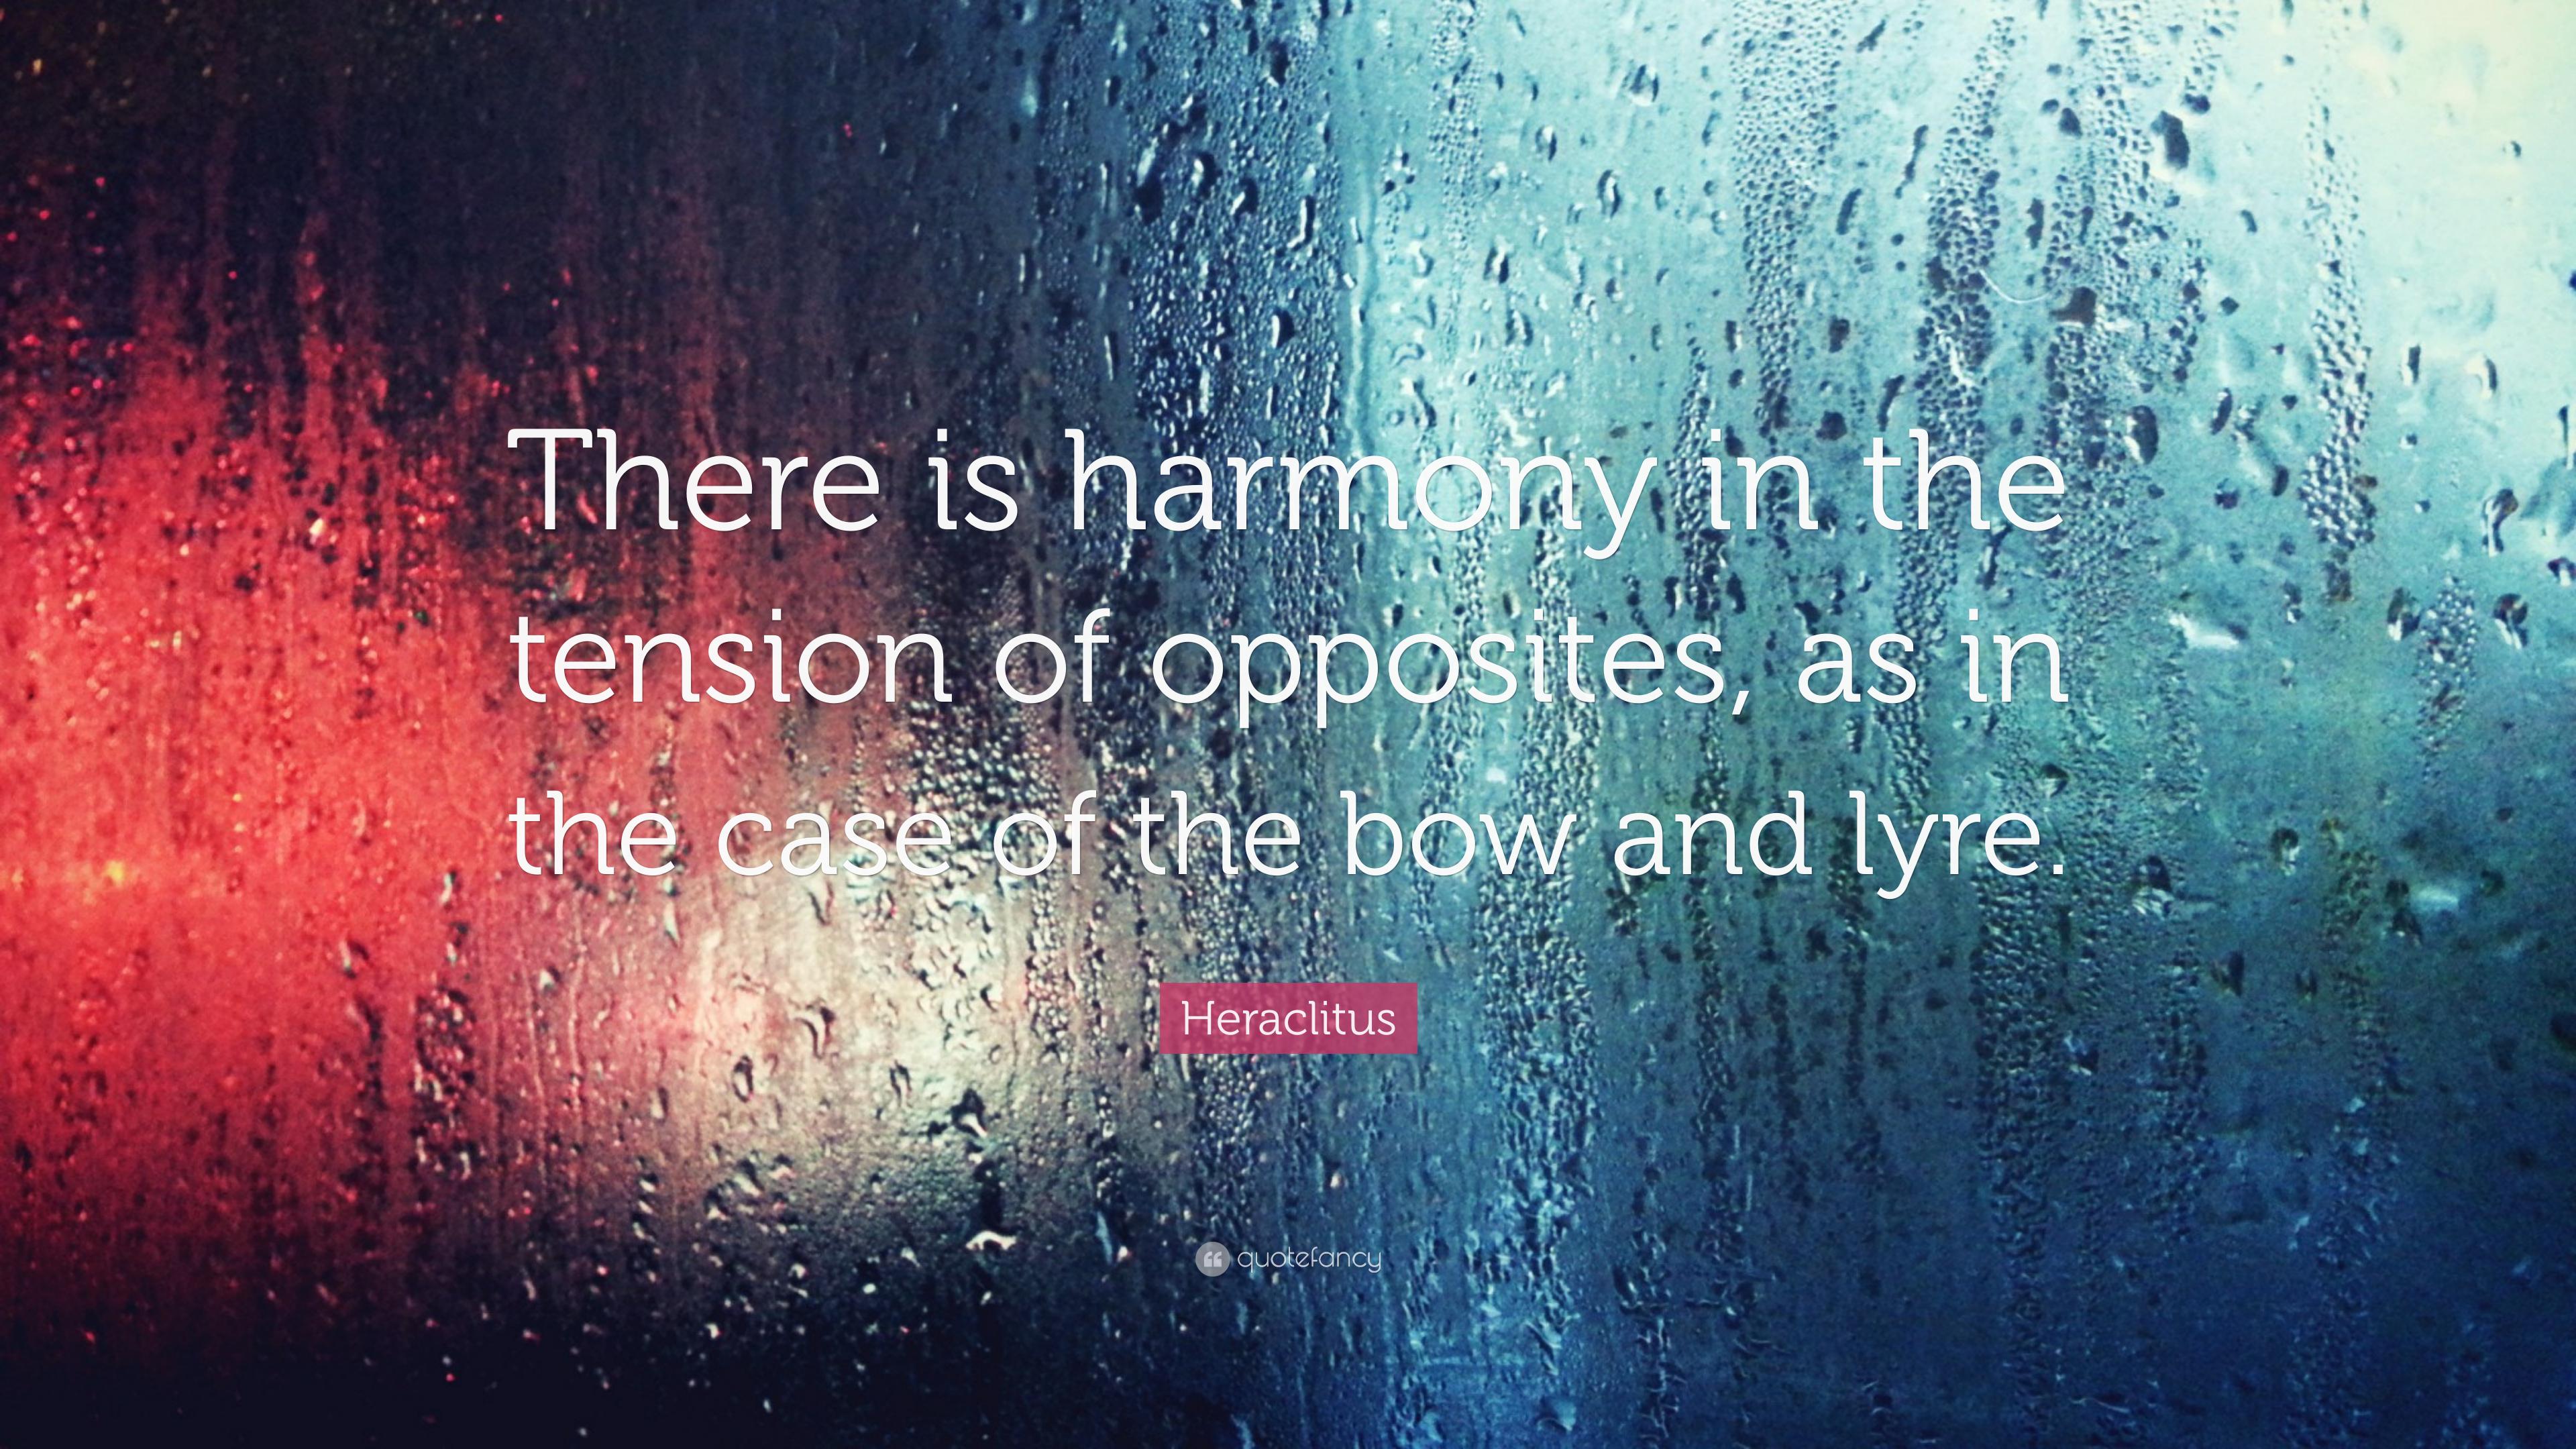 Heraclitus Quote: “There is harmony in the tension of opposites, as